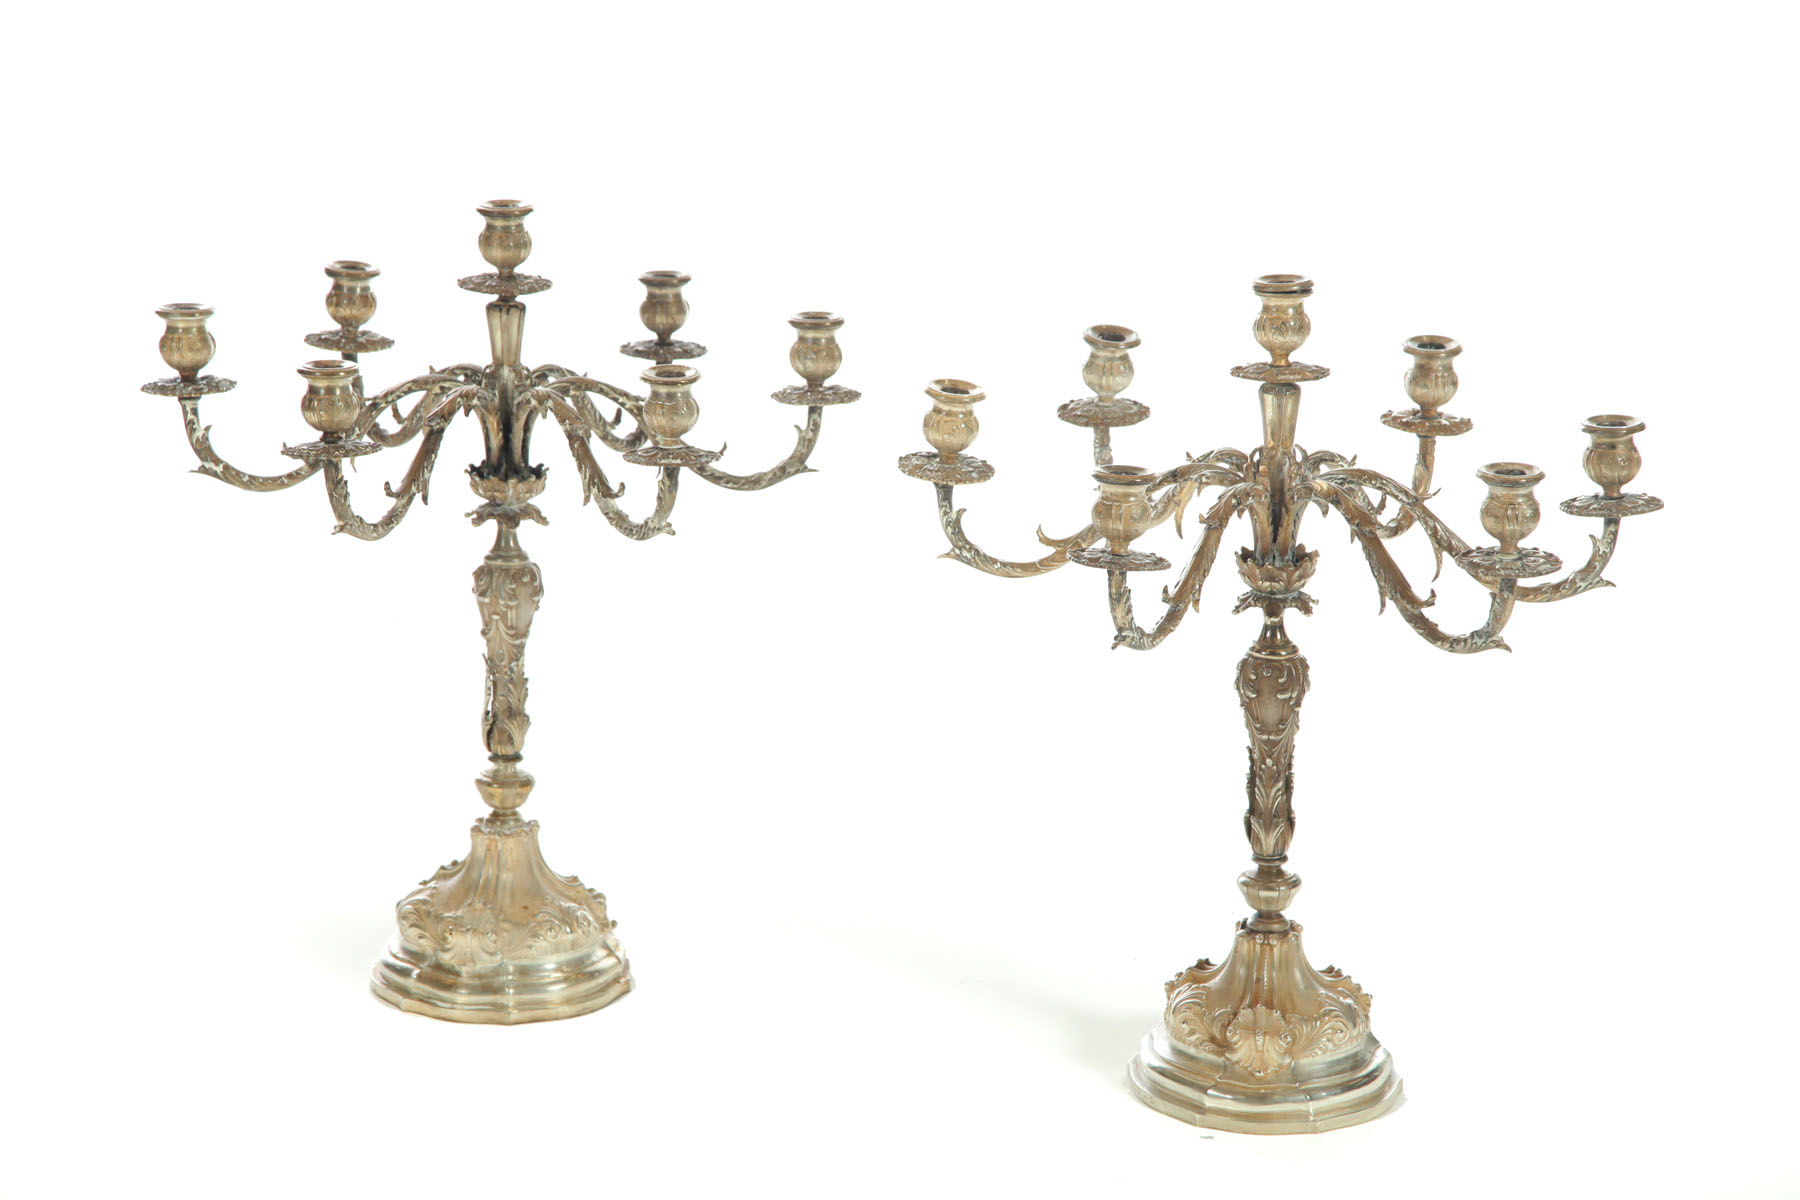 PAIR OF SILVER CANDELABRA Marked 113643